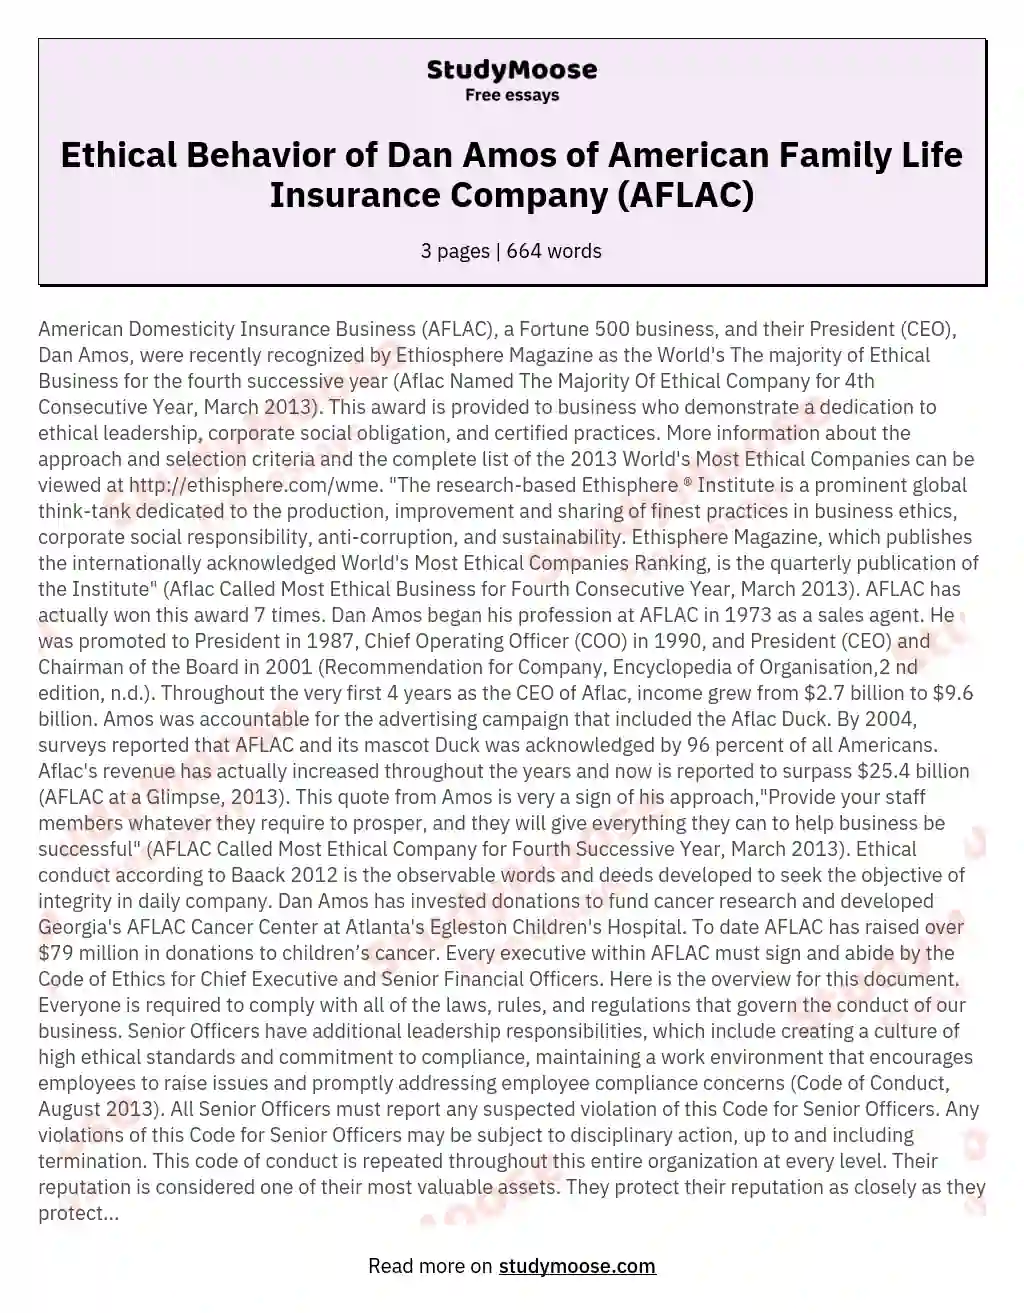 Ethical Behavior of Dan Amos of American Family Life Insurance Company (AFLAC) essay